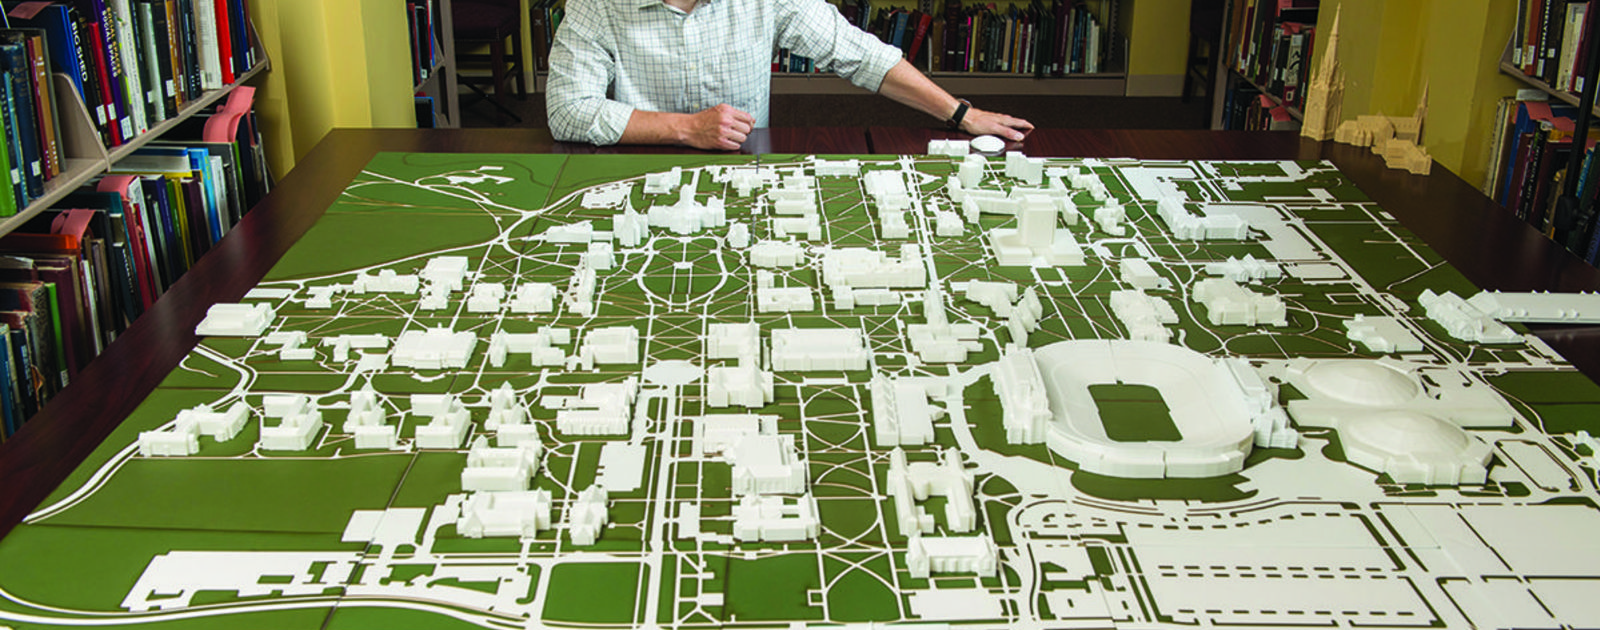 3D campus map assists students with visual challenges | News | Office